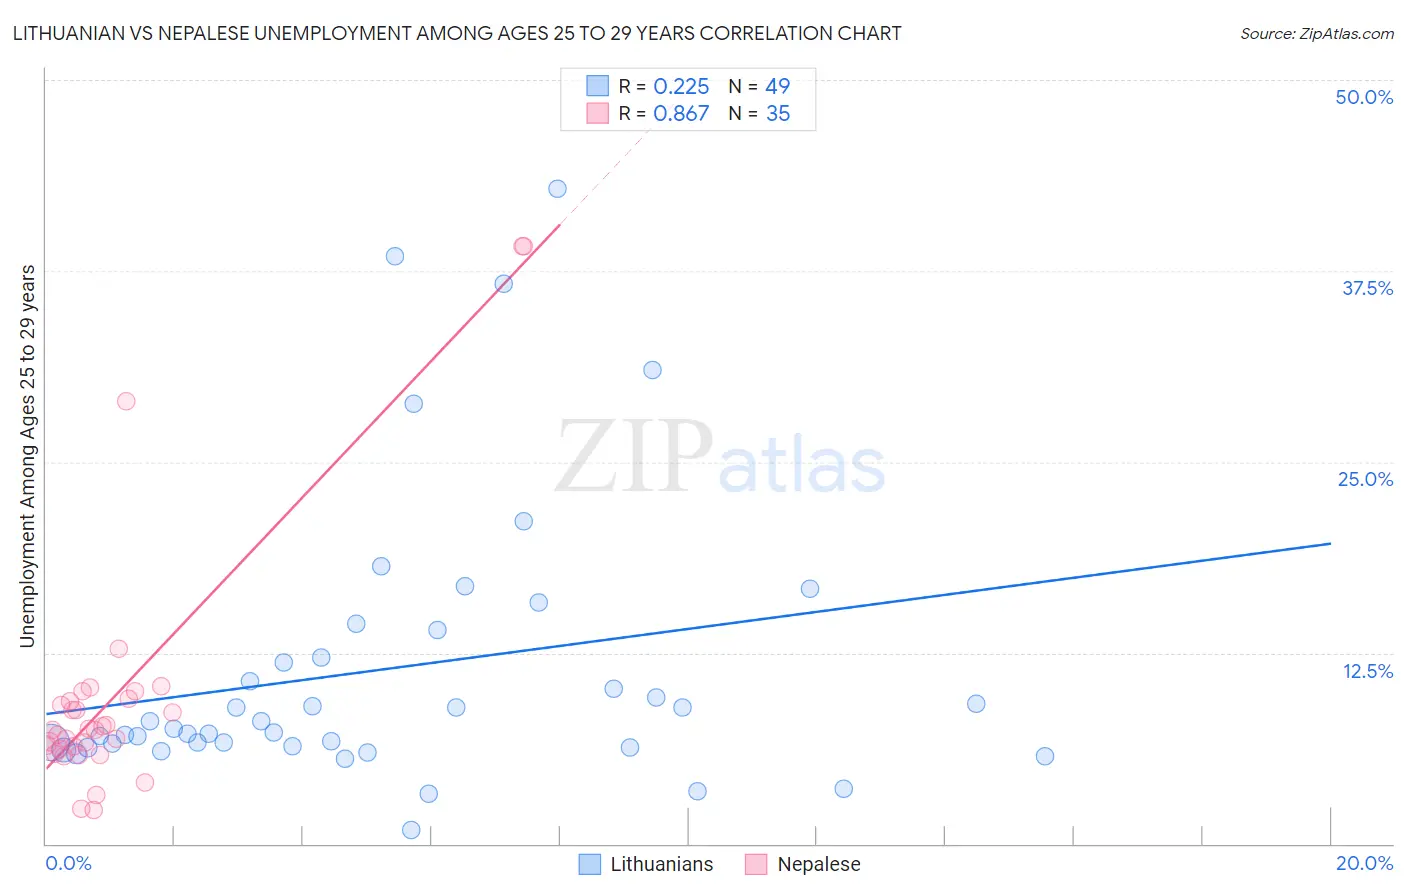 Lithuanian vs Nepalese Unemployment Among Ages 25 to 29 years